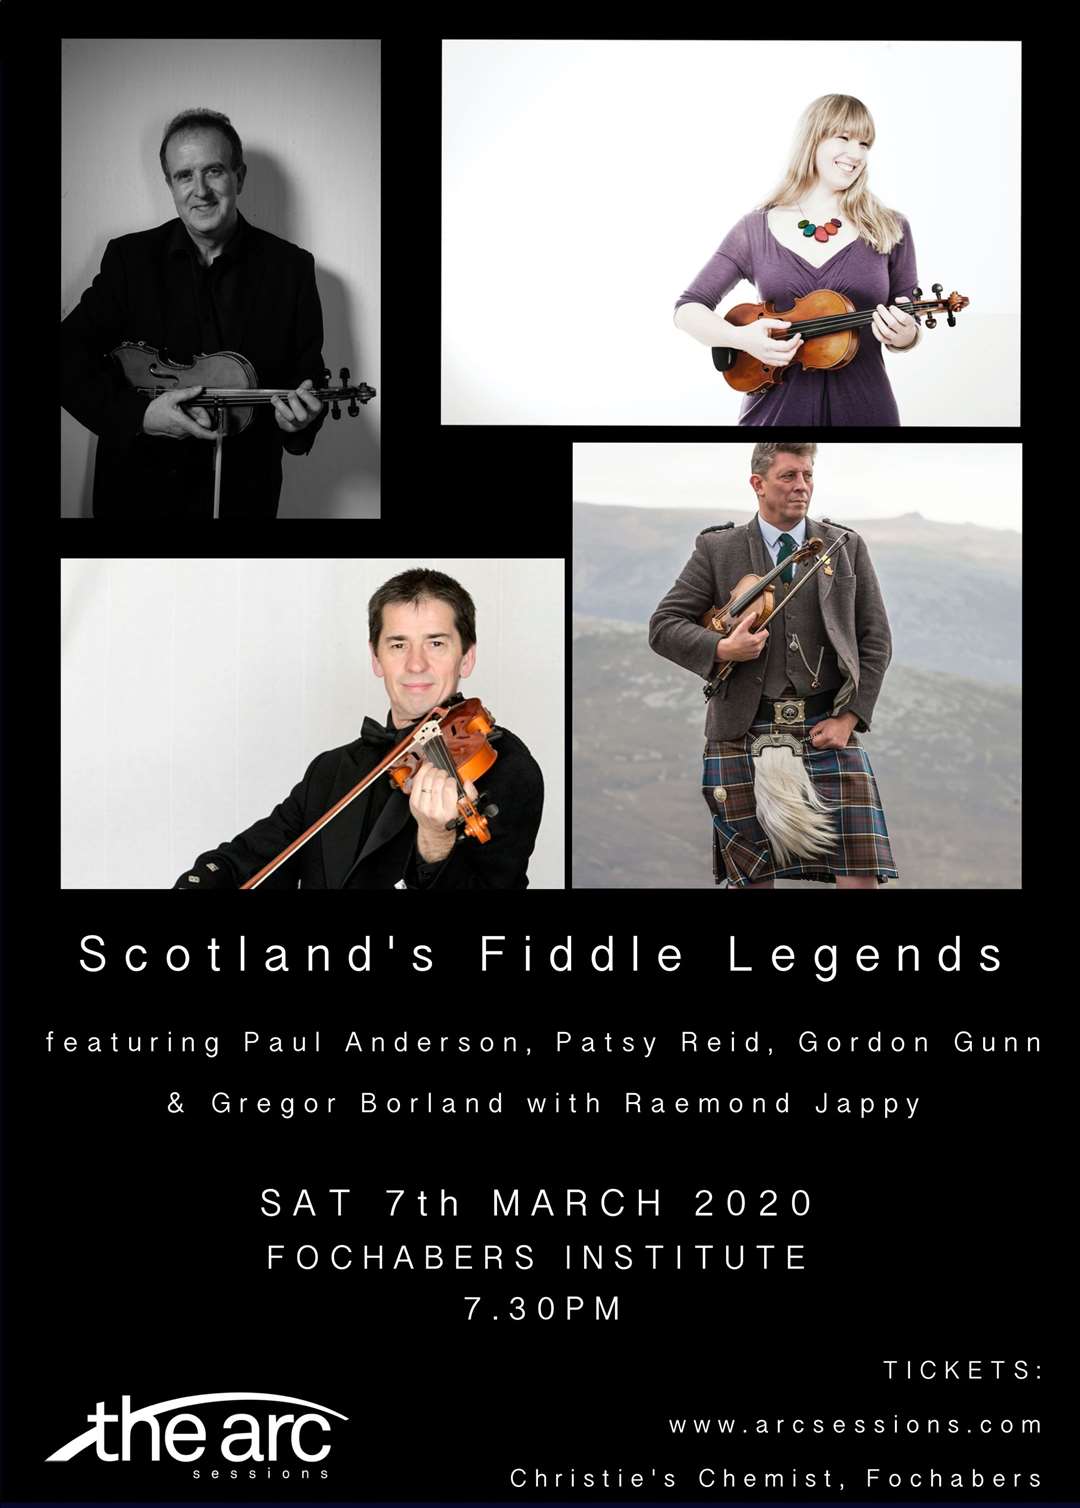 An evening of fine fiddle music isin store at the Fochabers Public Institute.